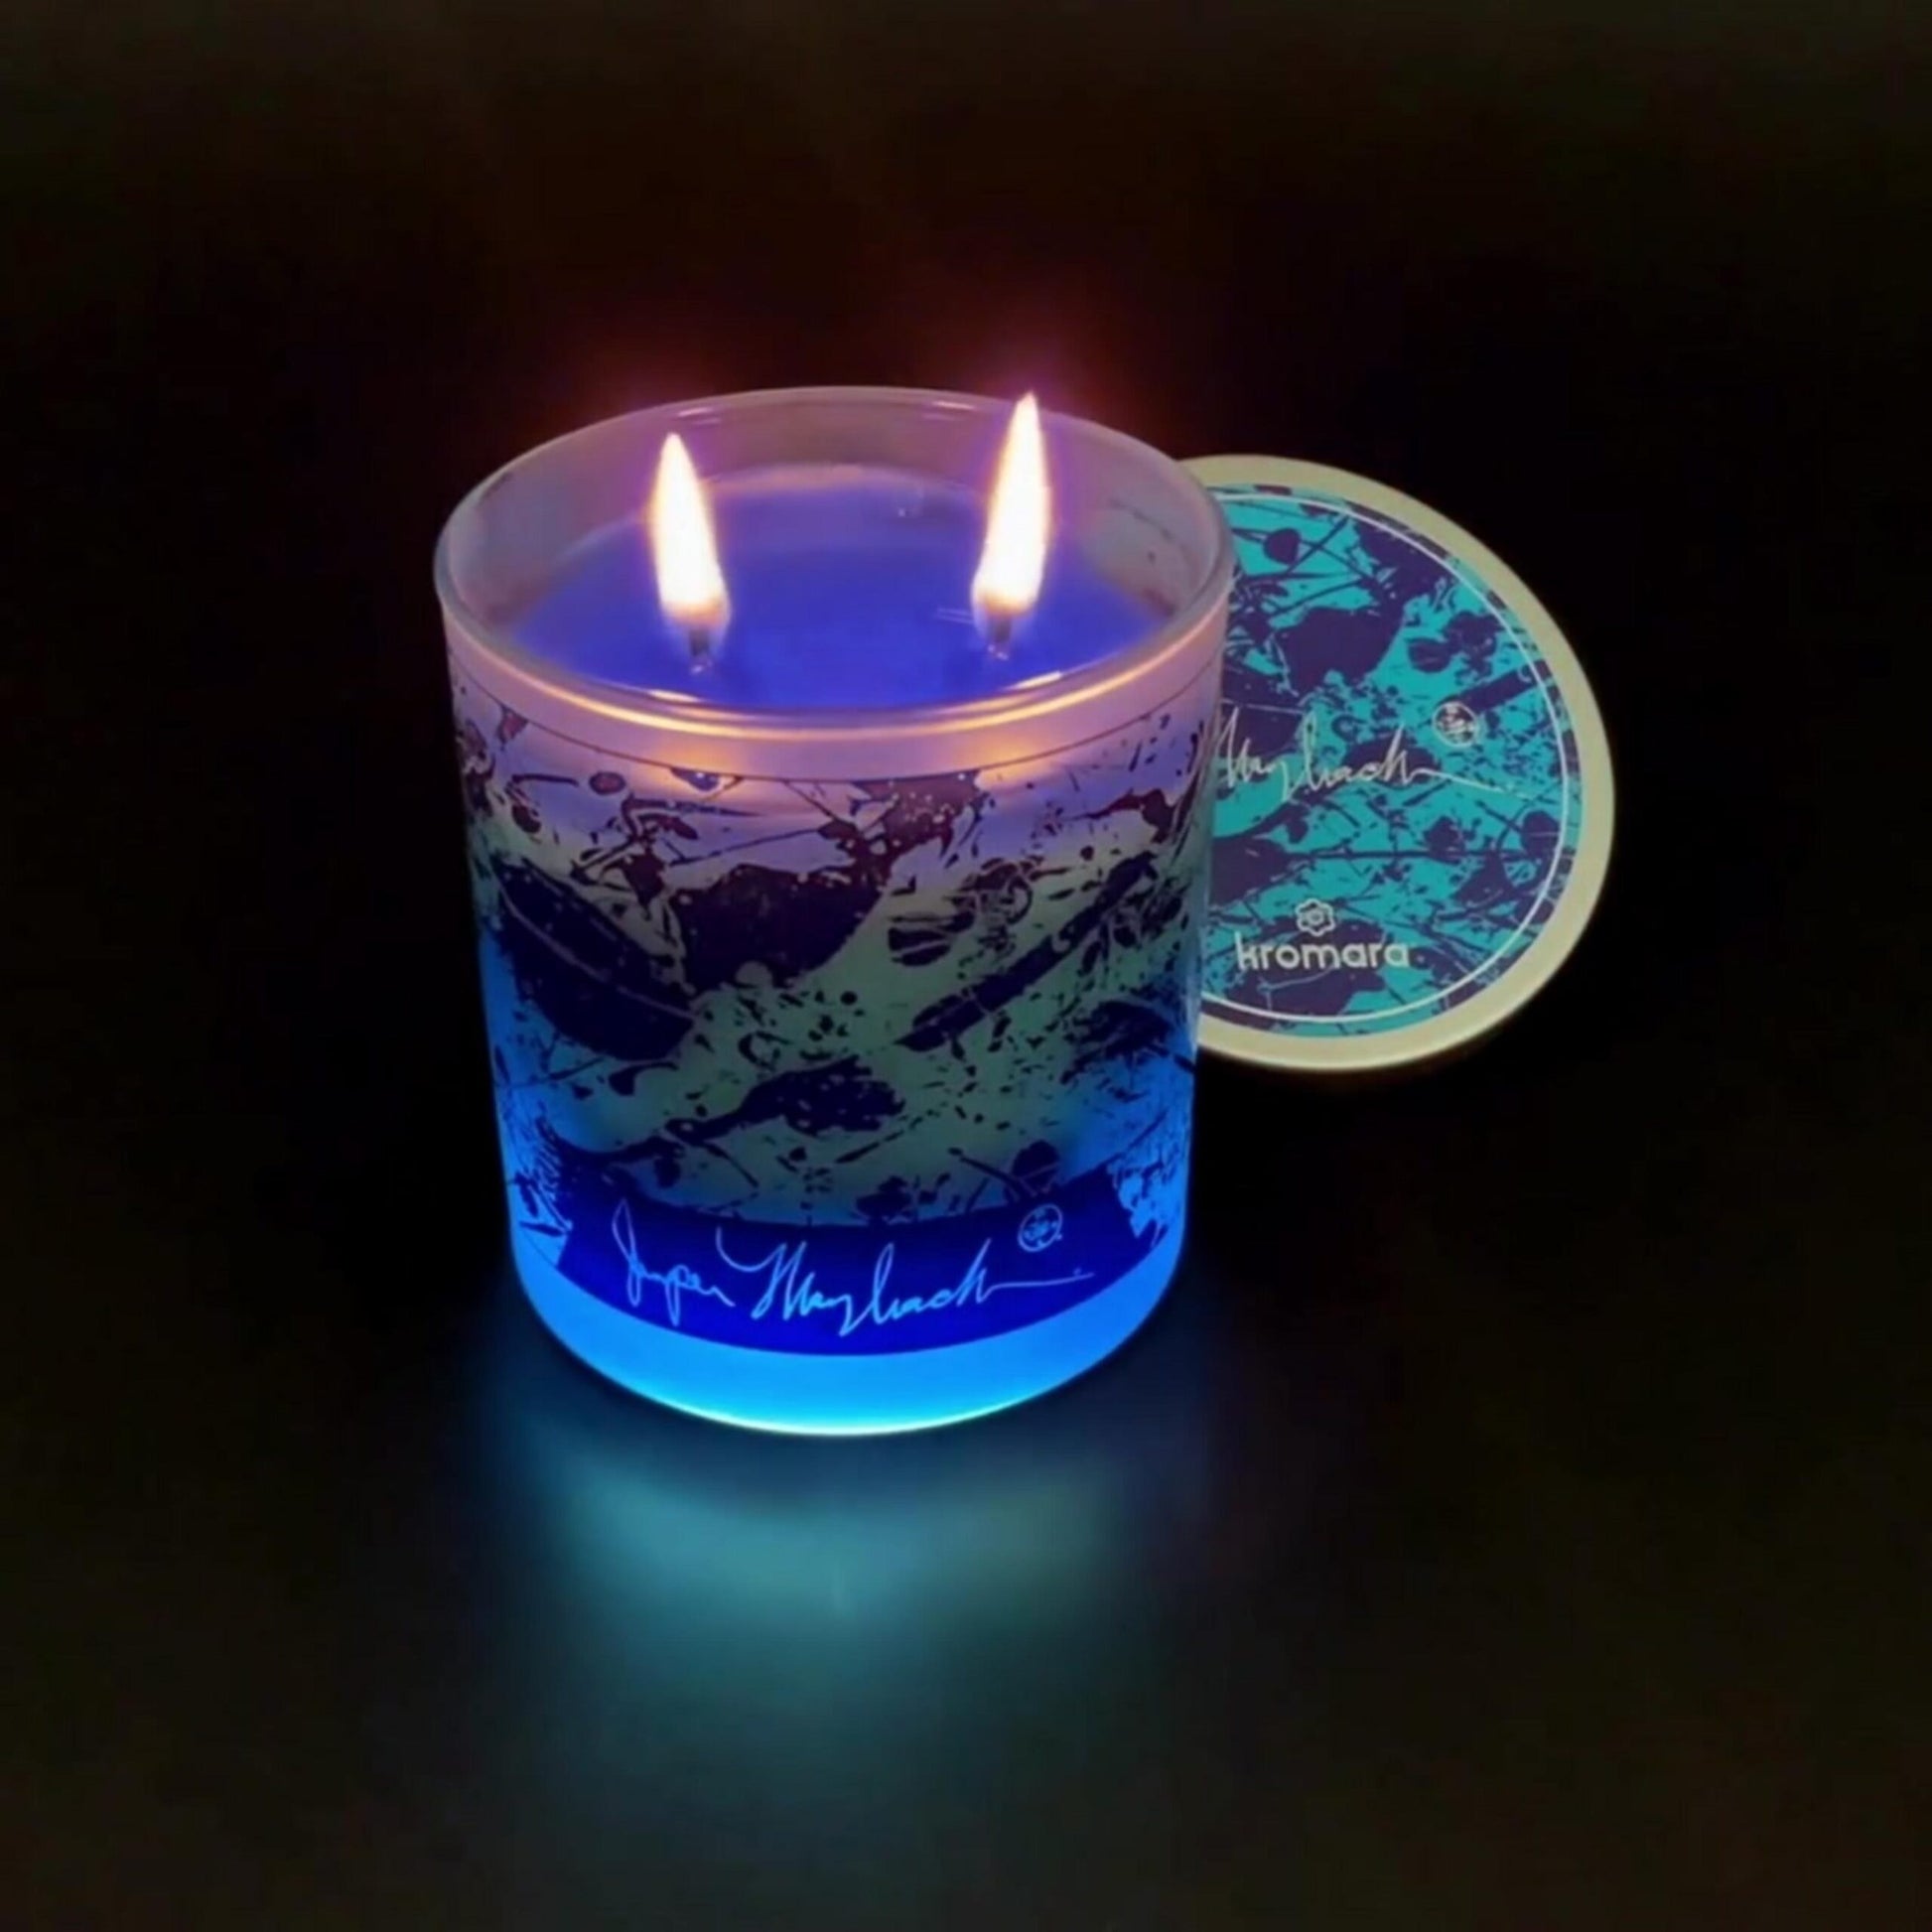 Aliens in the Ocean - Candle - Jumper Maybach®